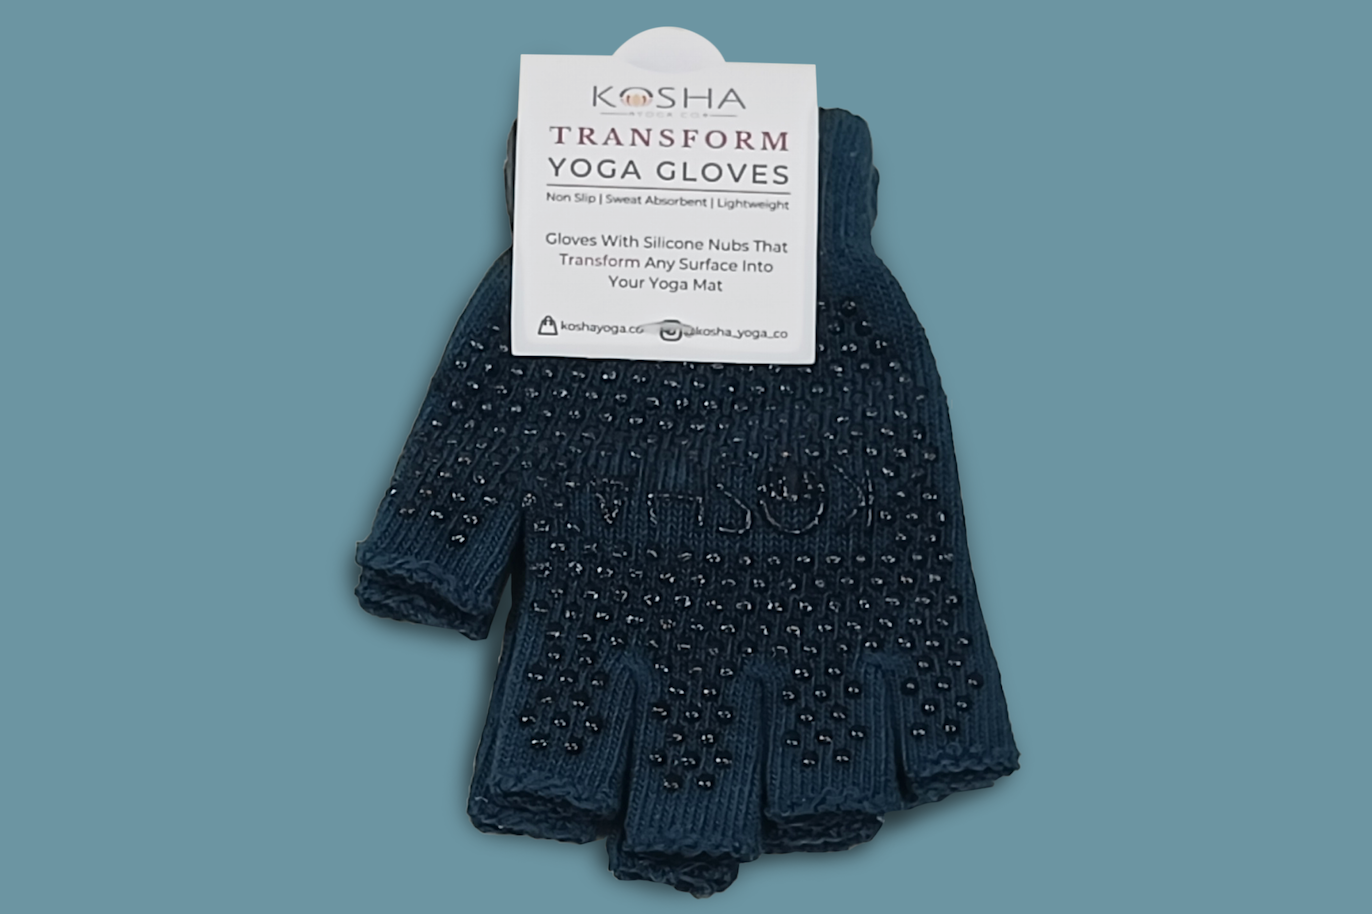 skidless anti skid gloves for yoga pilates working out travel yoga mat kosha yoga co in teal colour for men colour